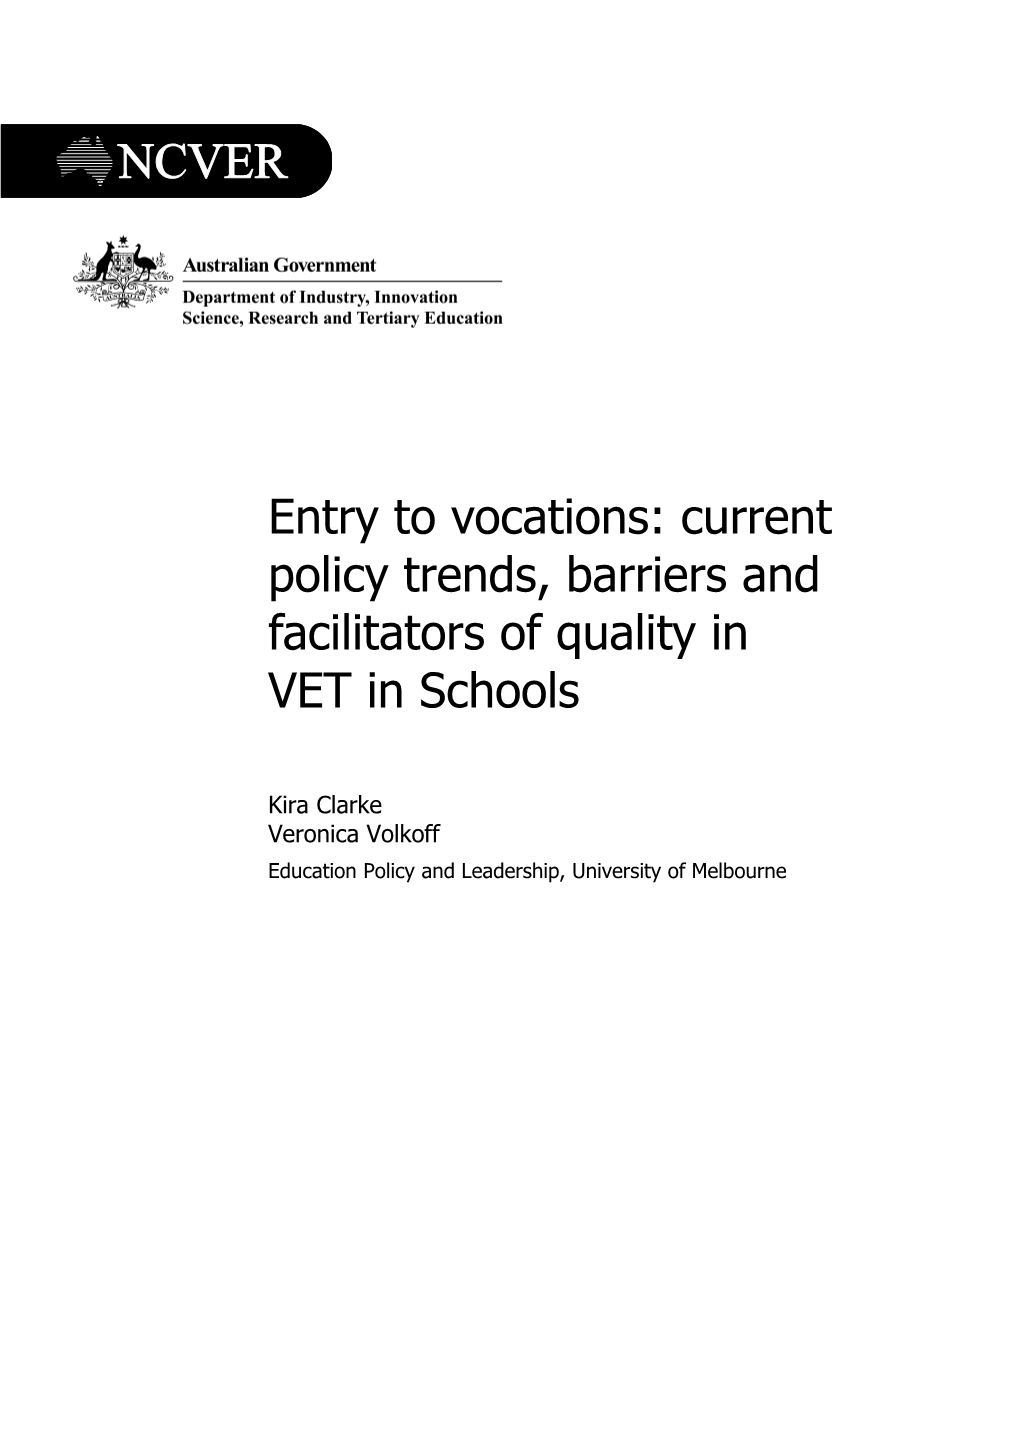 Entry to Vocations: Current Policy Trends, Barriers and Facilitators of Quality in Vetin Schools